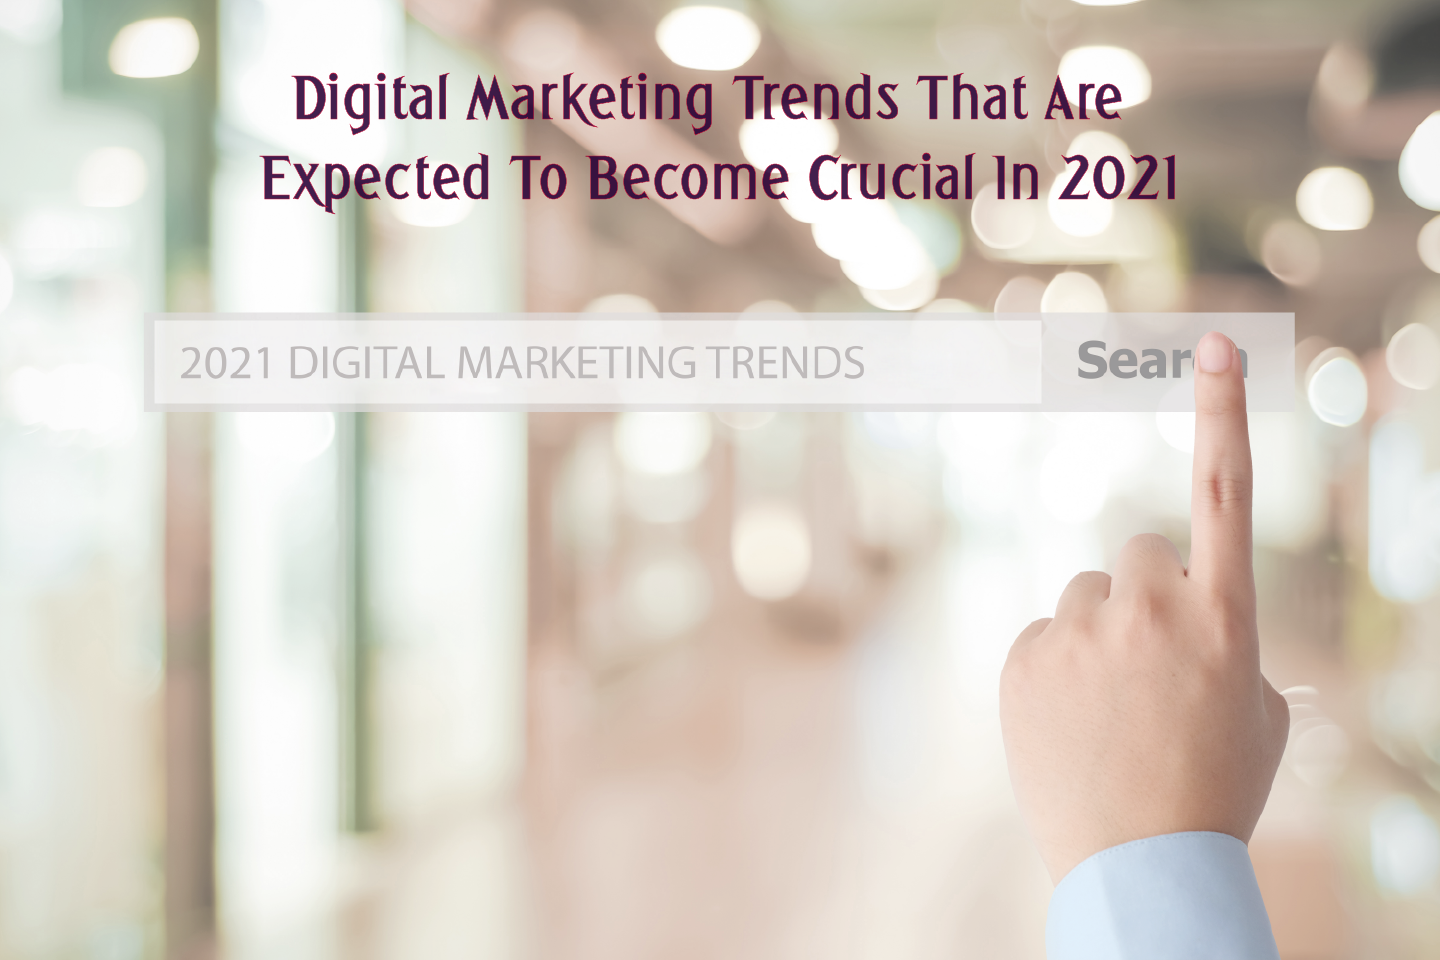 Digital Marketing Trends That Are Expected To Become Crucial In 2021